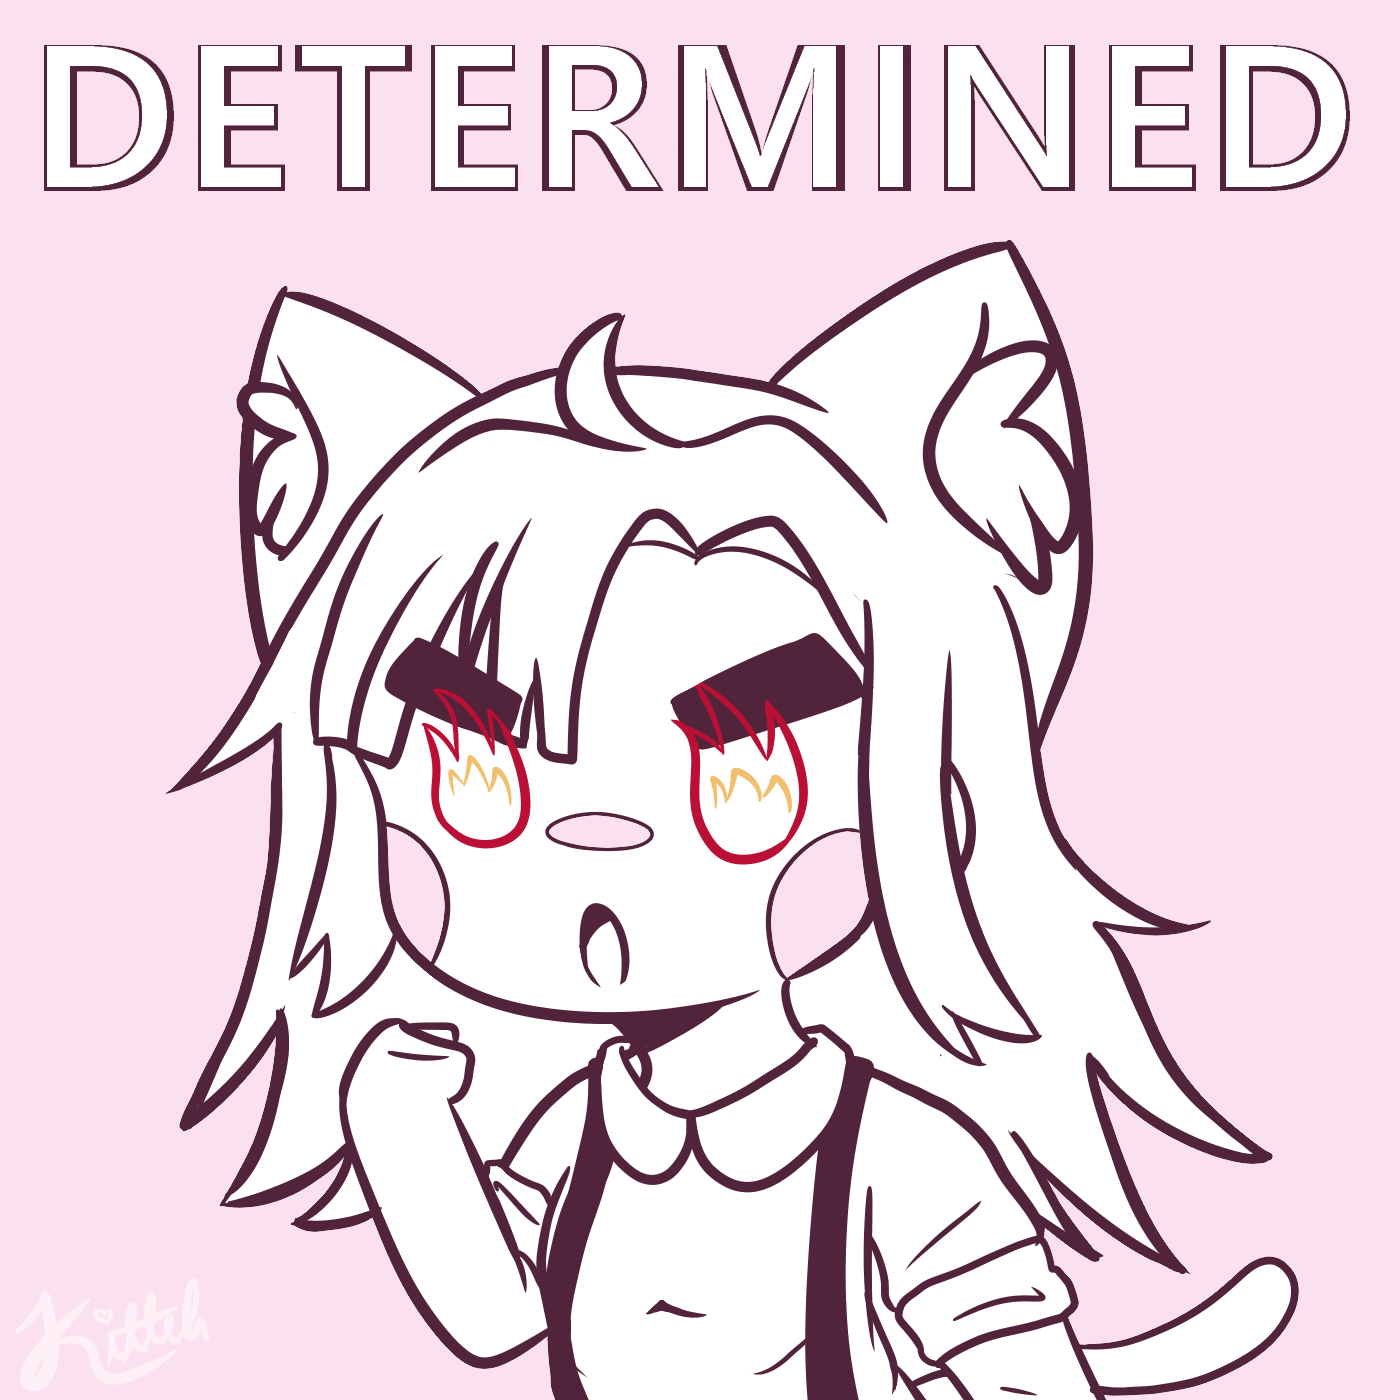 determined-gif.gif